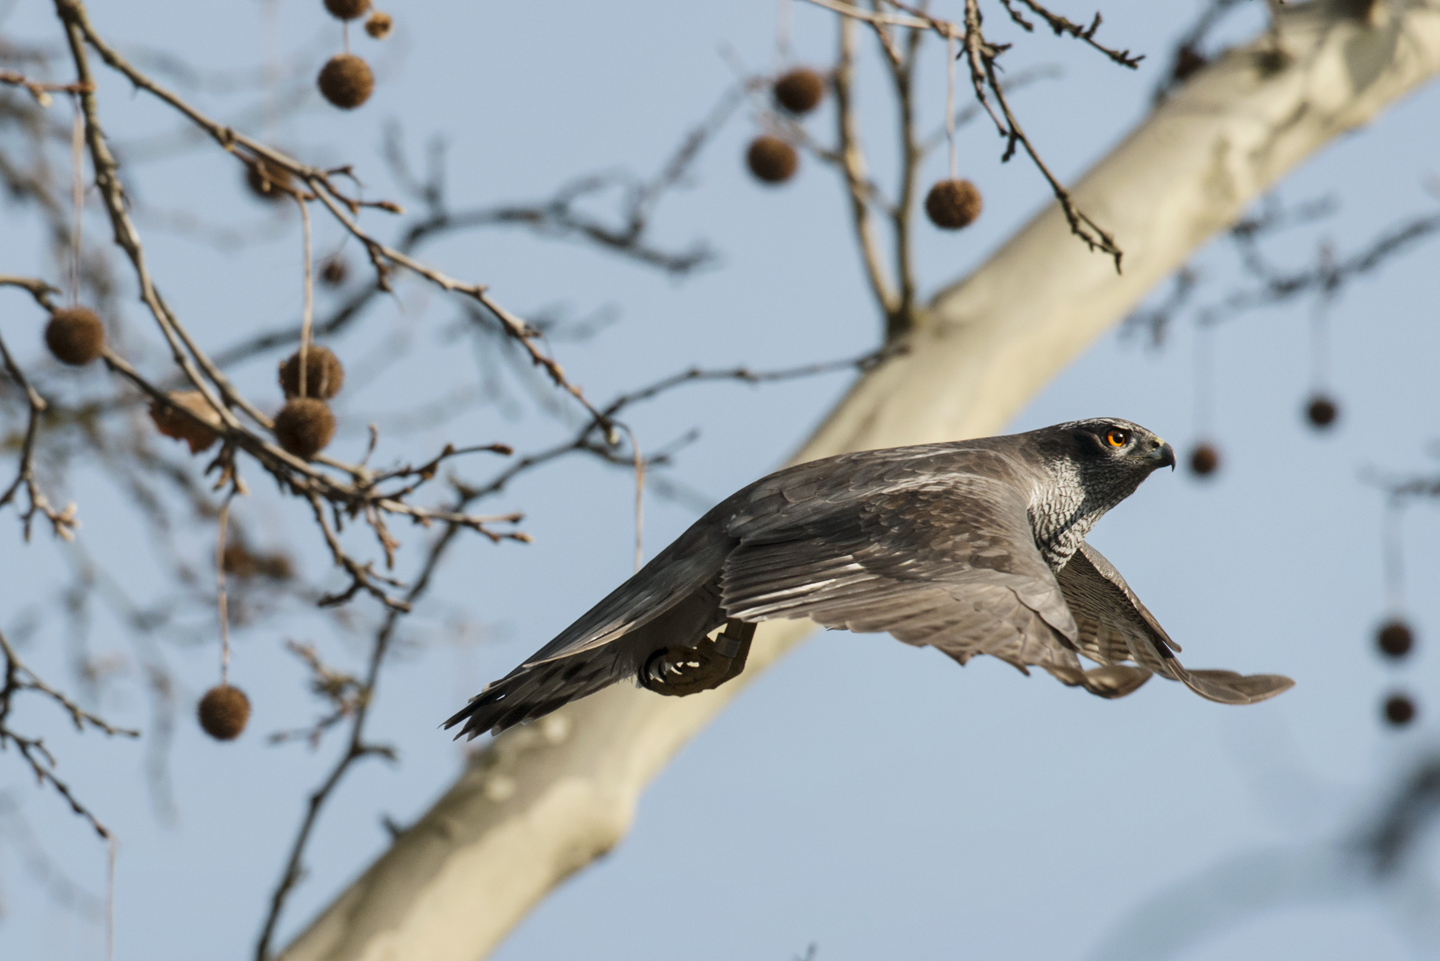  The Berlin goshawks are relatively free from persecution compared to their rural cousins. In the city, there are more eyes to monitor and look out for them 